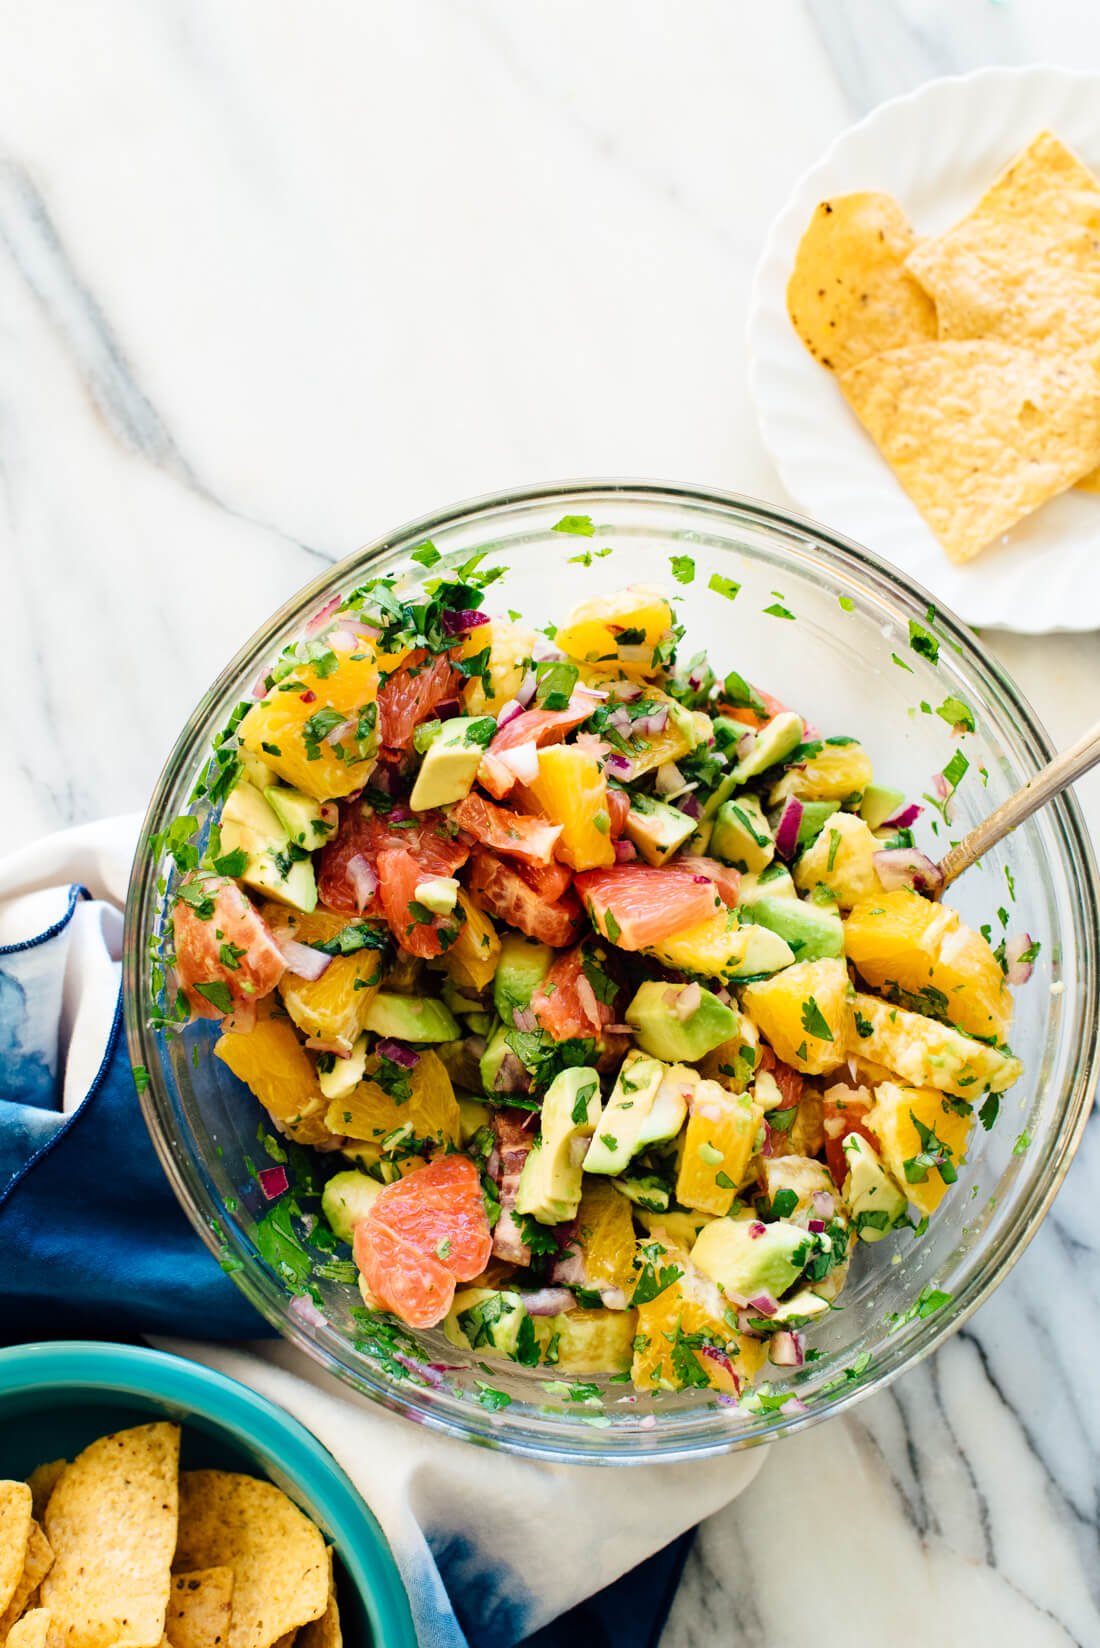 Vegan citrus ceviche with tortilla chips